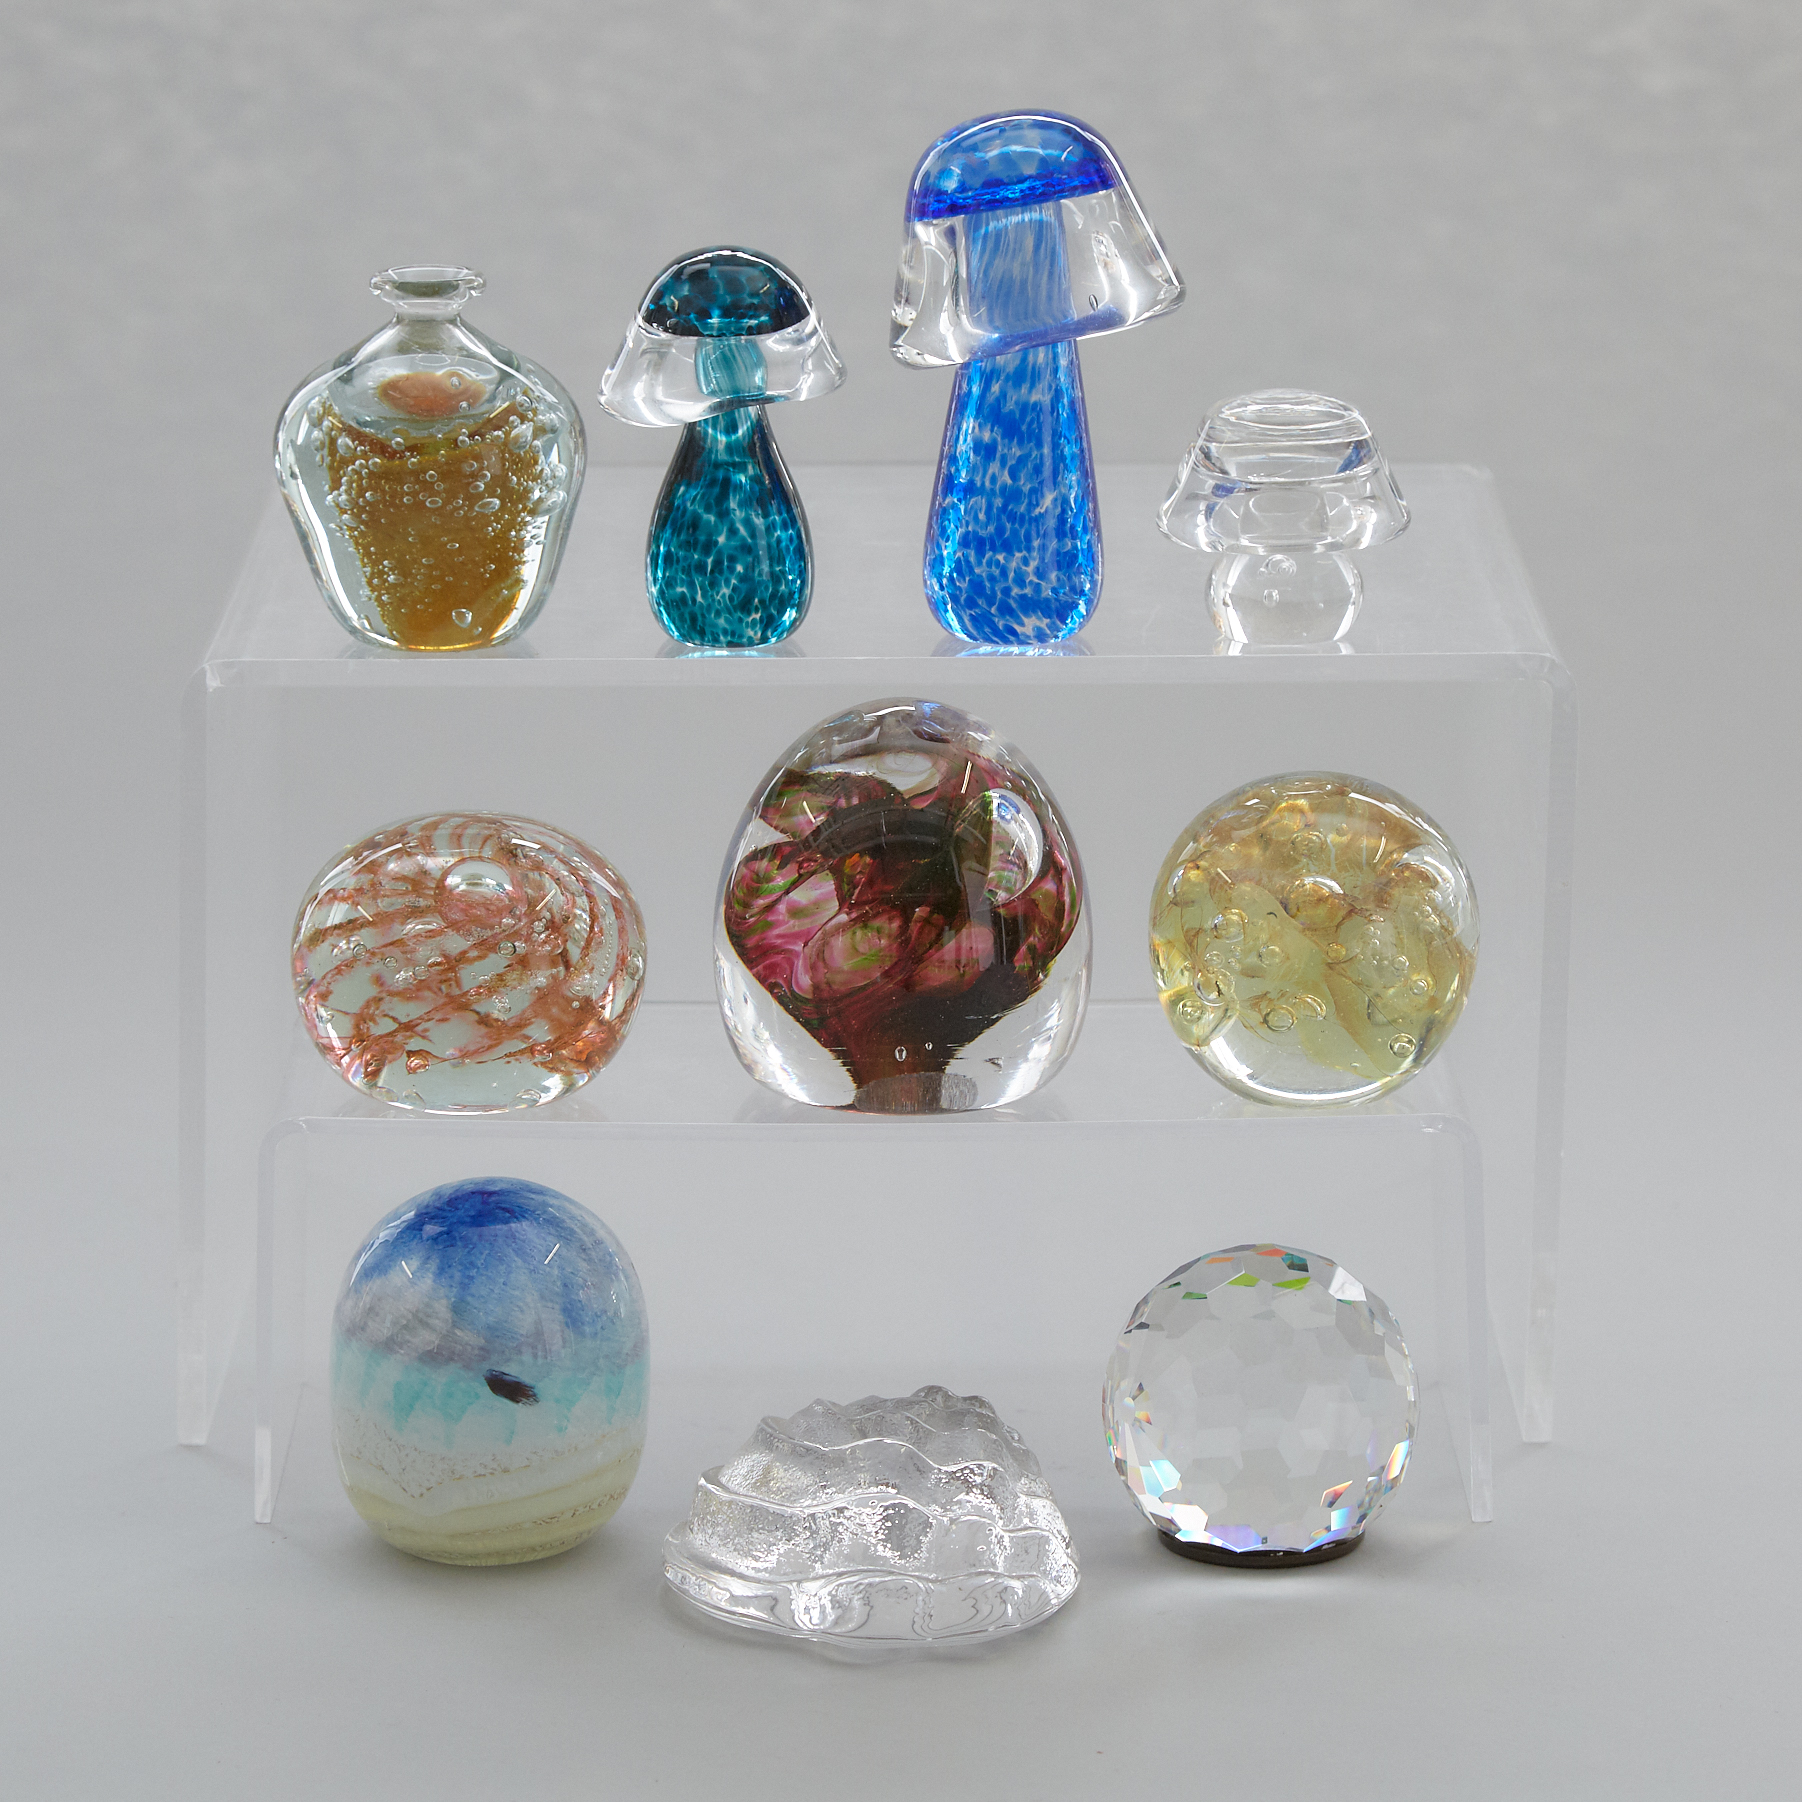 SIx Various Glass Paperweights, Three Glass Mushrooms, and a Small Vase, 20th century